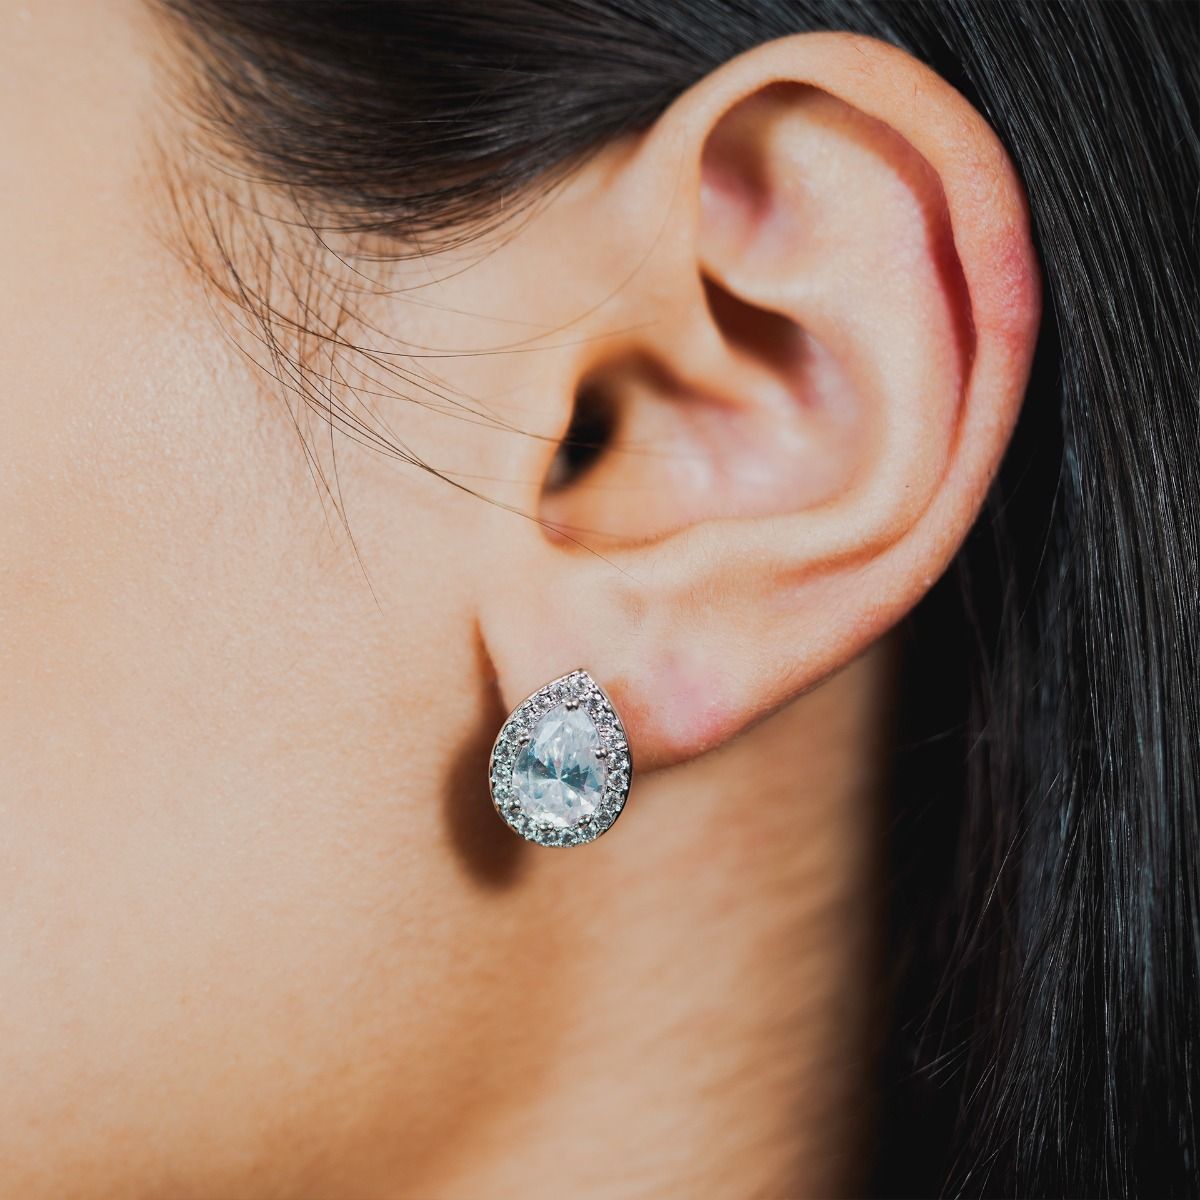 These beautiful stud earrings are set with flawlessly cut cubic zirconia stones, surrounding a dazzling oval cut centre stone. Wear to add timeless glamour to any look.